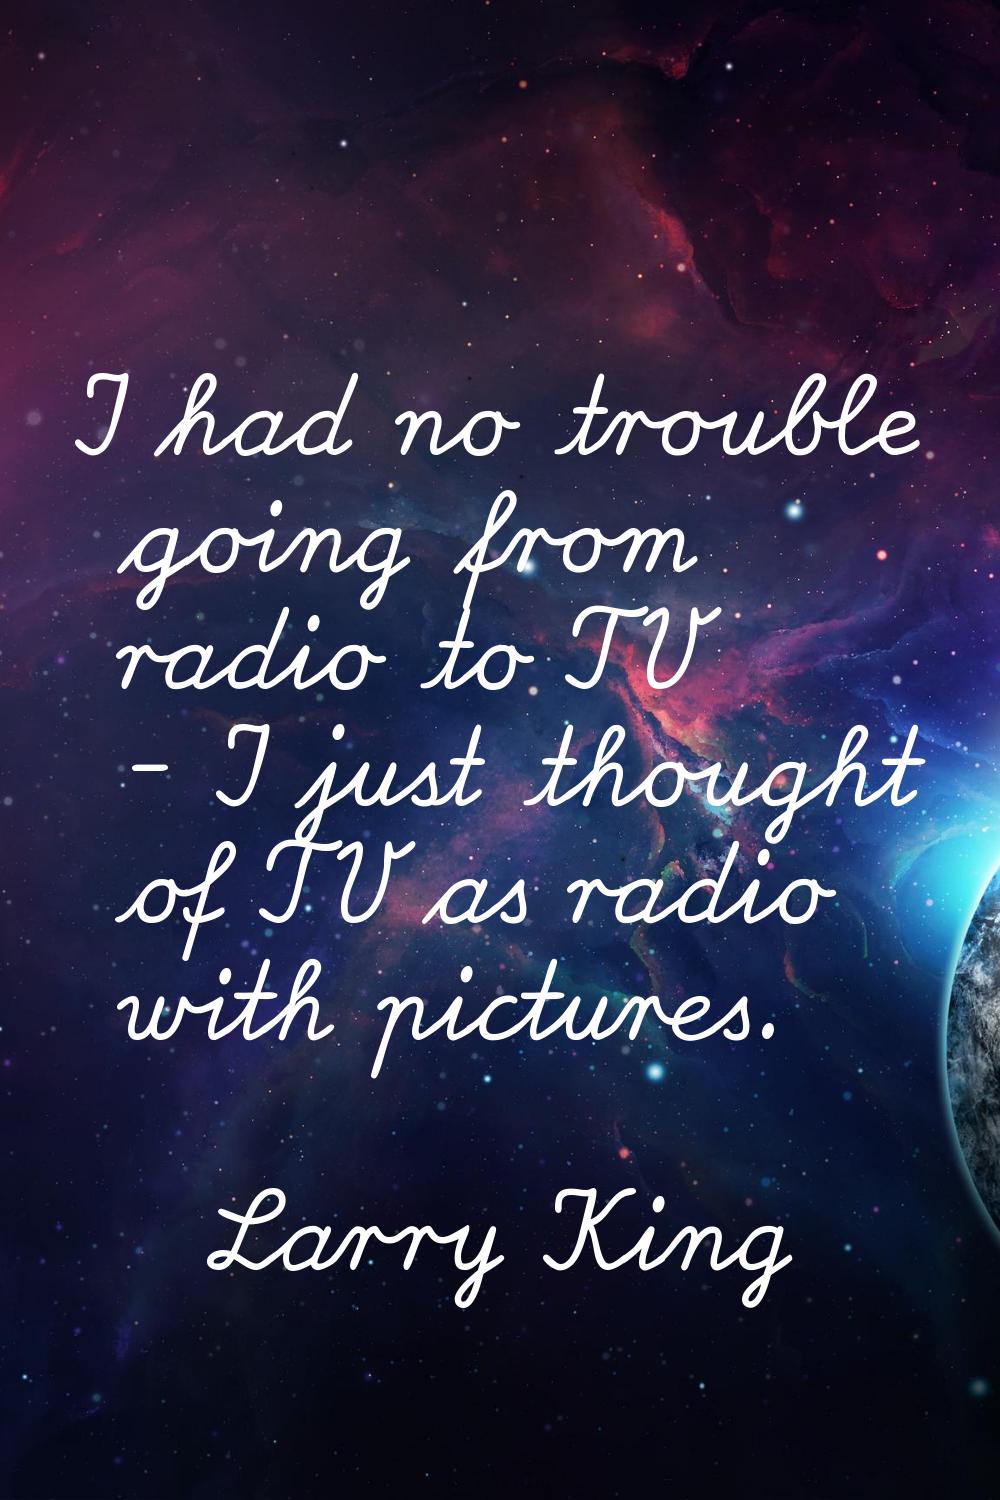 I had no trouble going from radio to TV - I just thought of TV as radio with pictures.